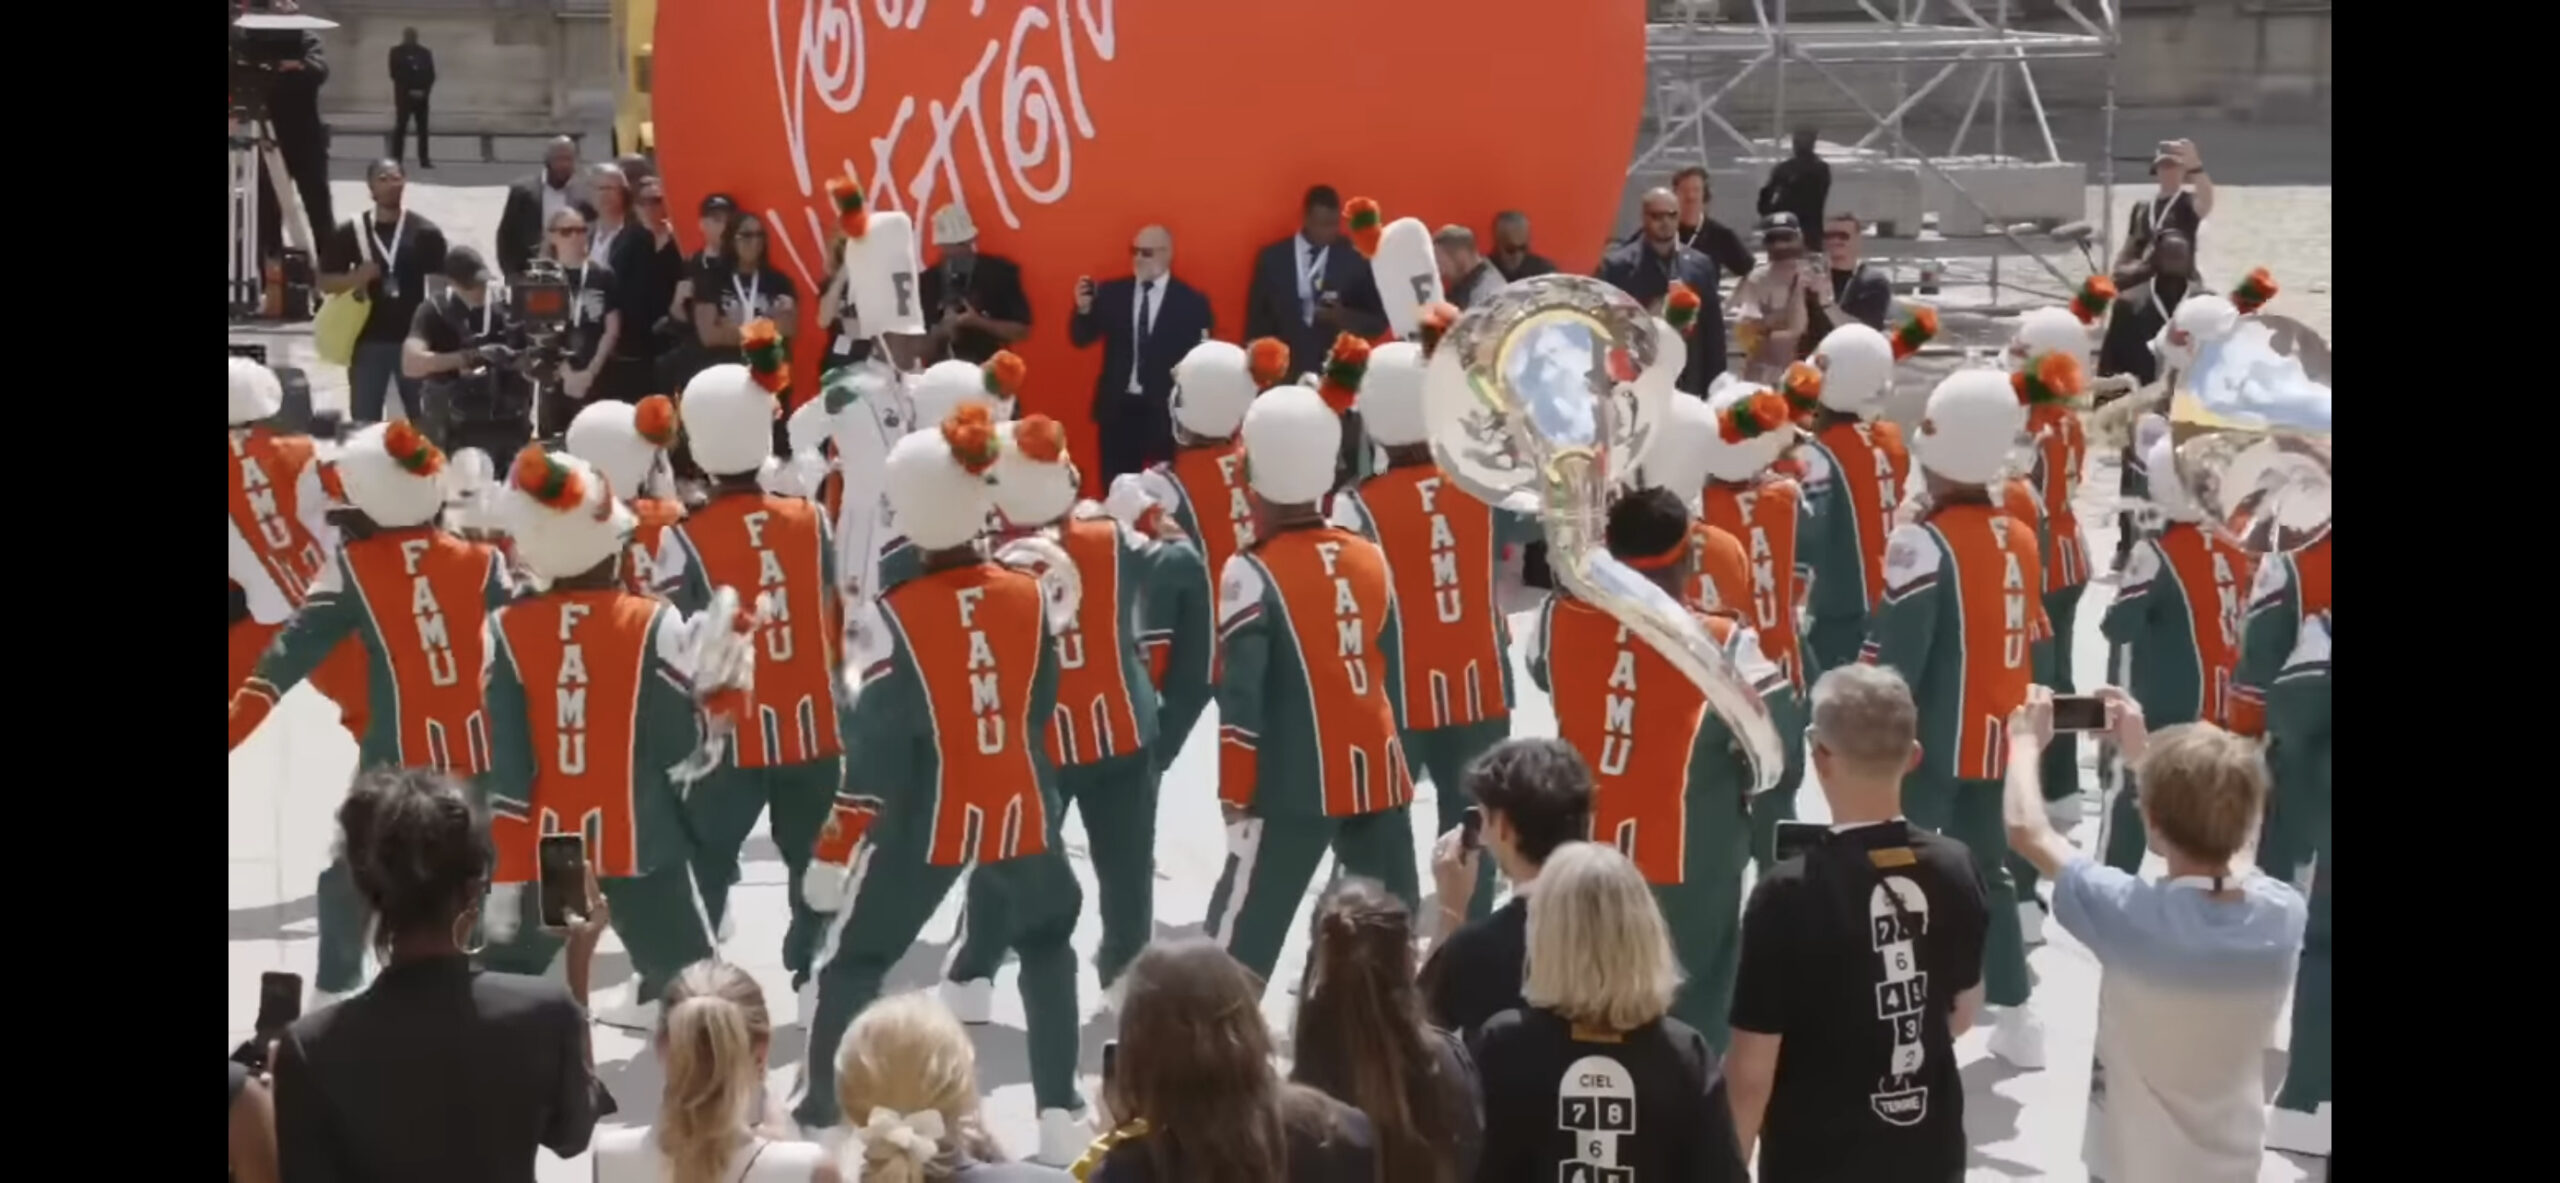 Louis Vuitton Men's Show Featured a Marching Band and Kendrick Lamar – WWD